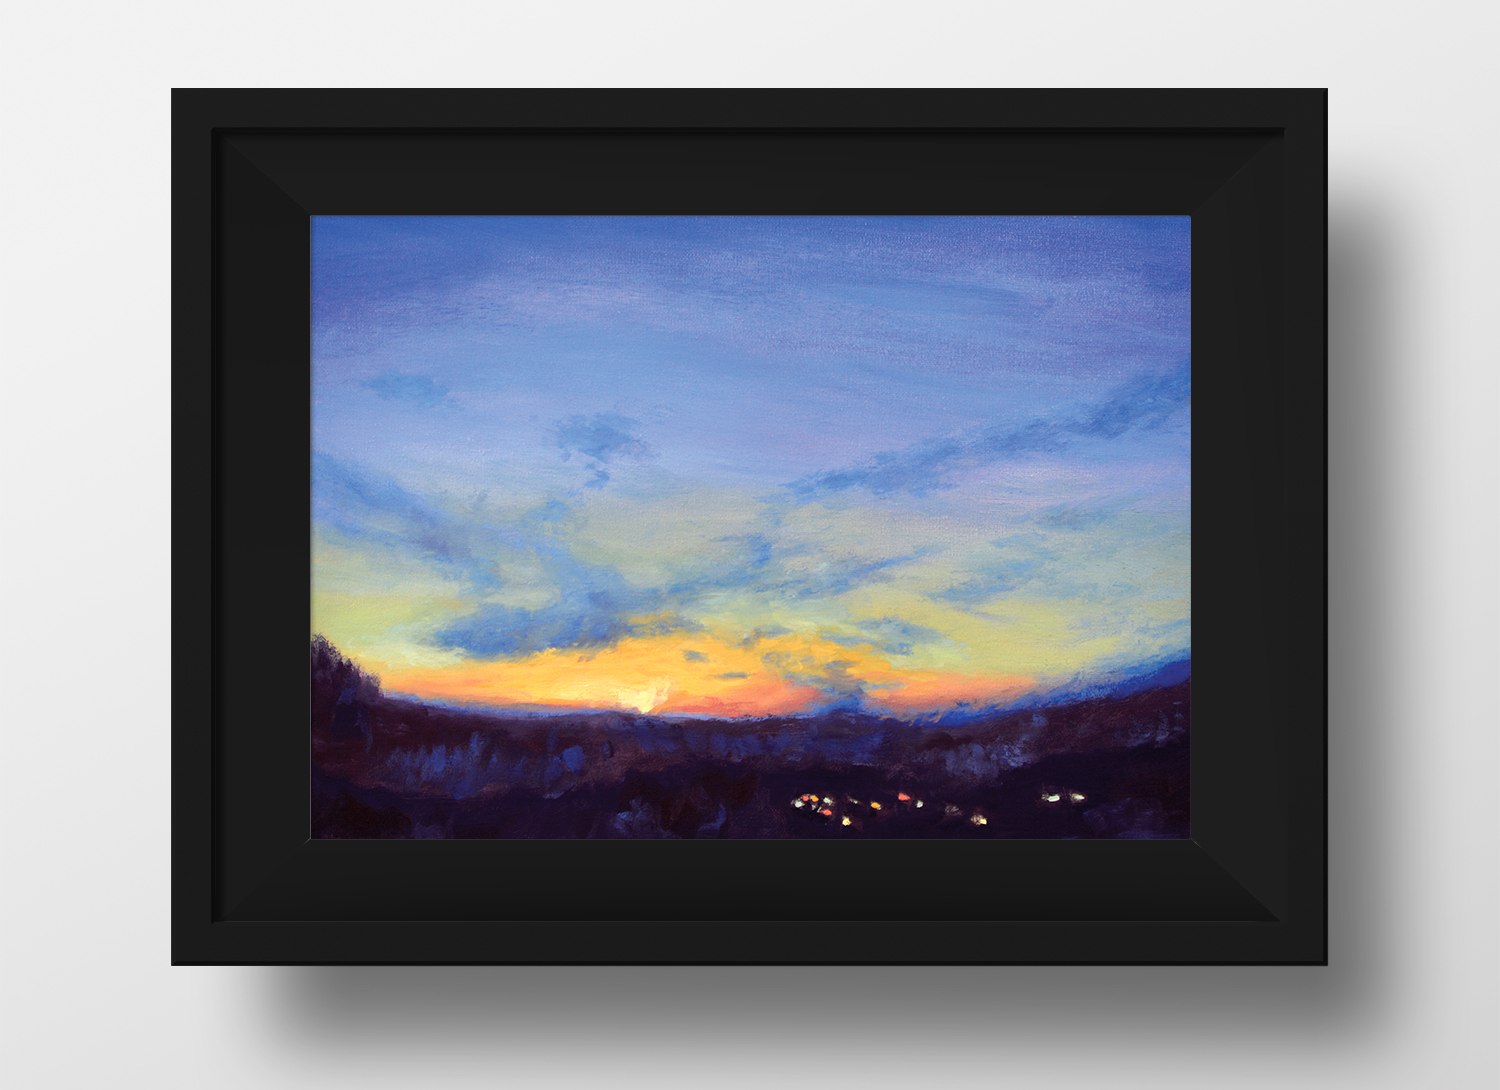 Breaking Dawn Original Oil Painting by Andrew Gaia in frame